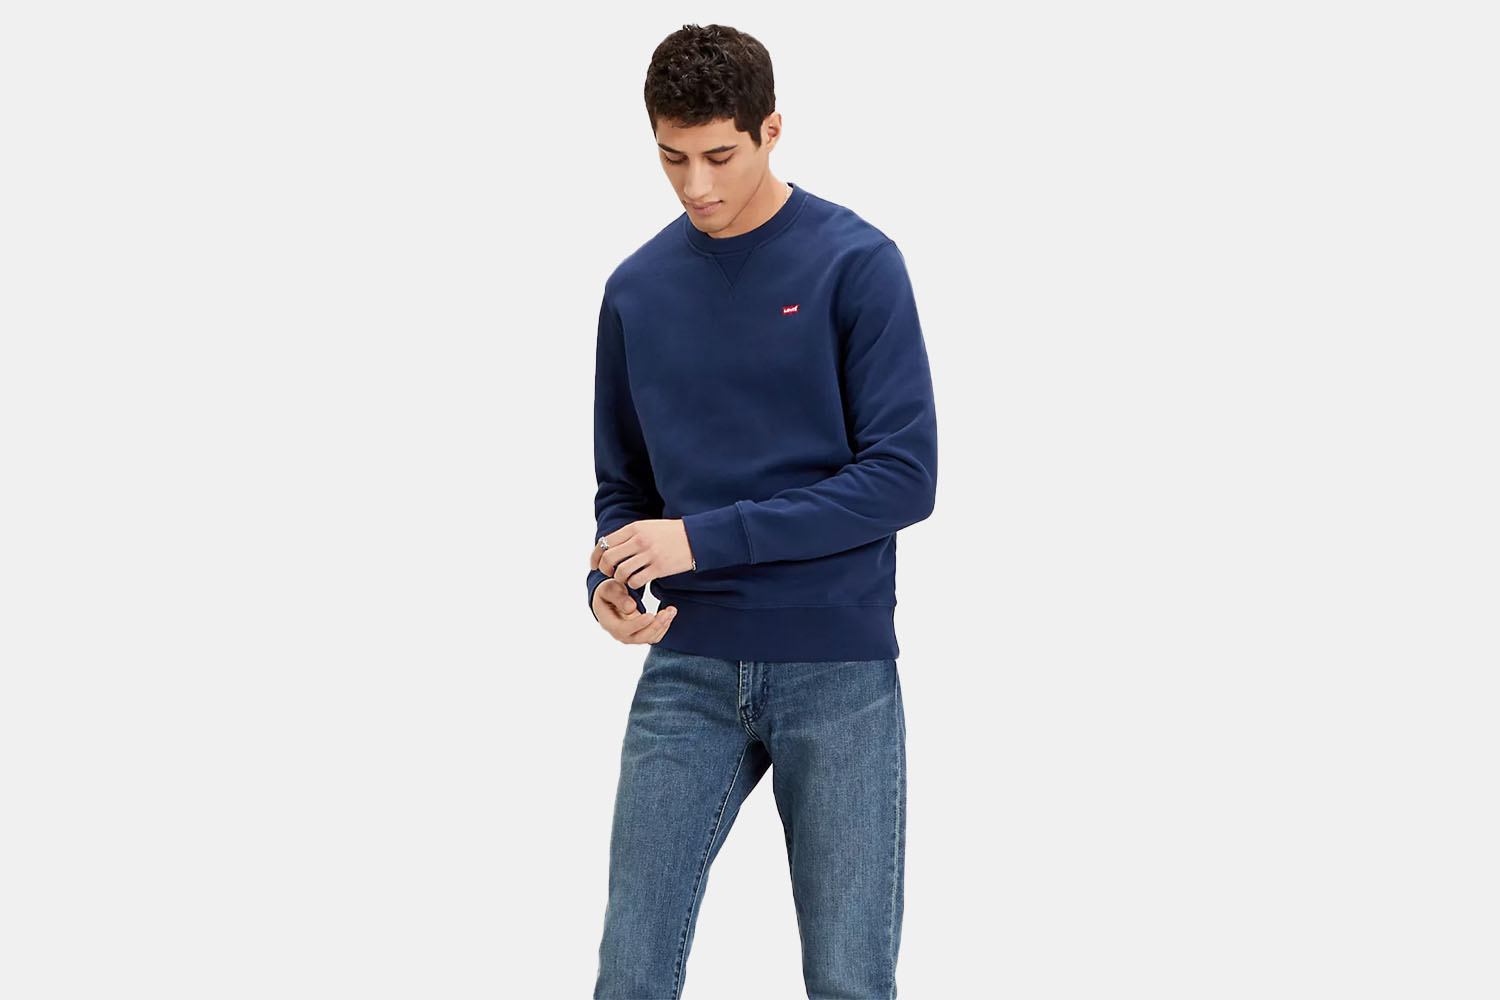 A model wearing a navy Levi's relaxed crewneck sweater.